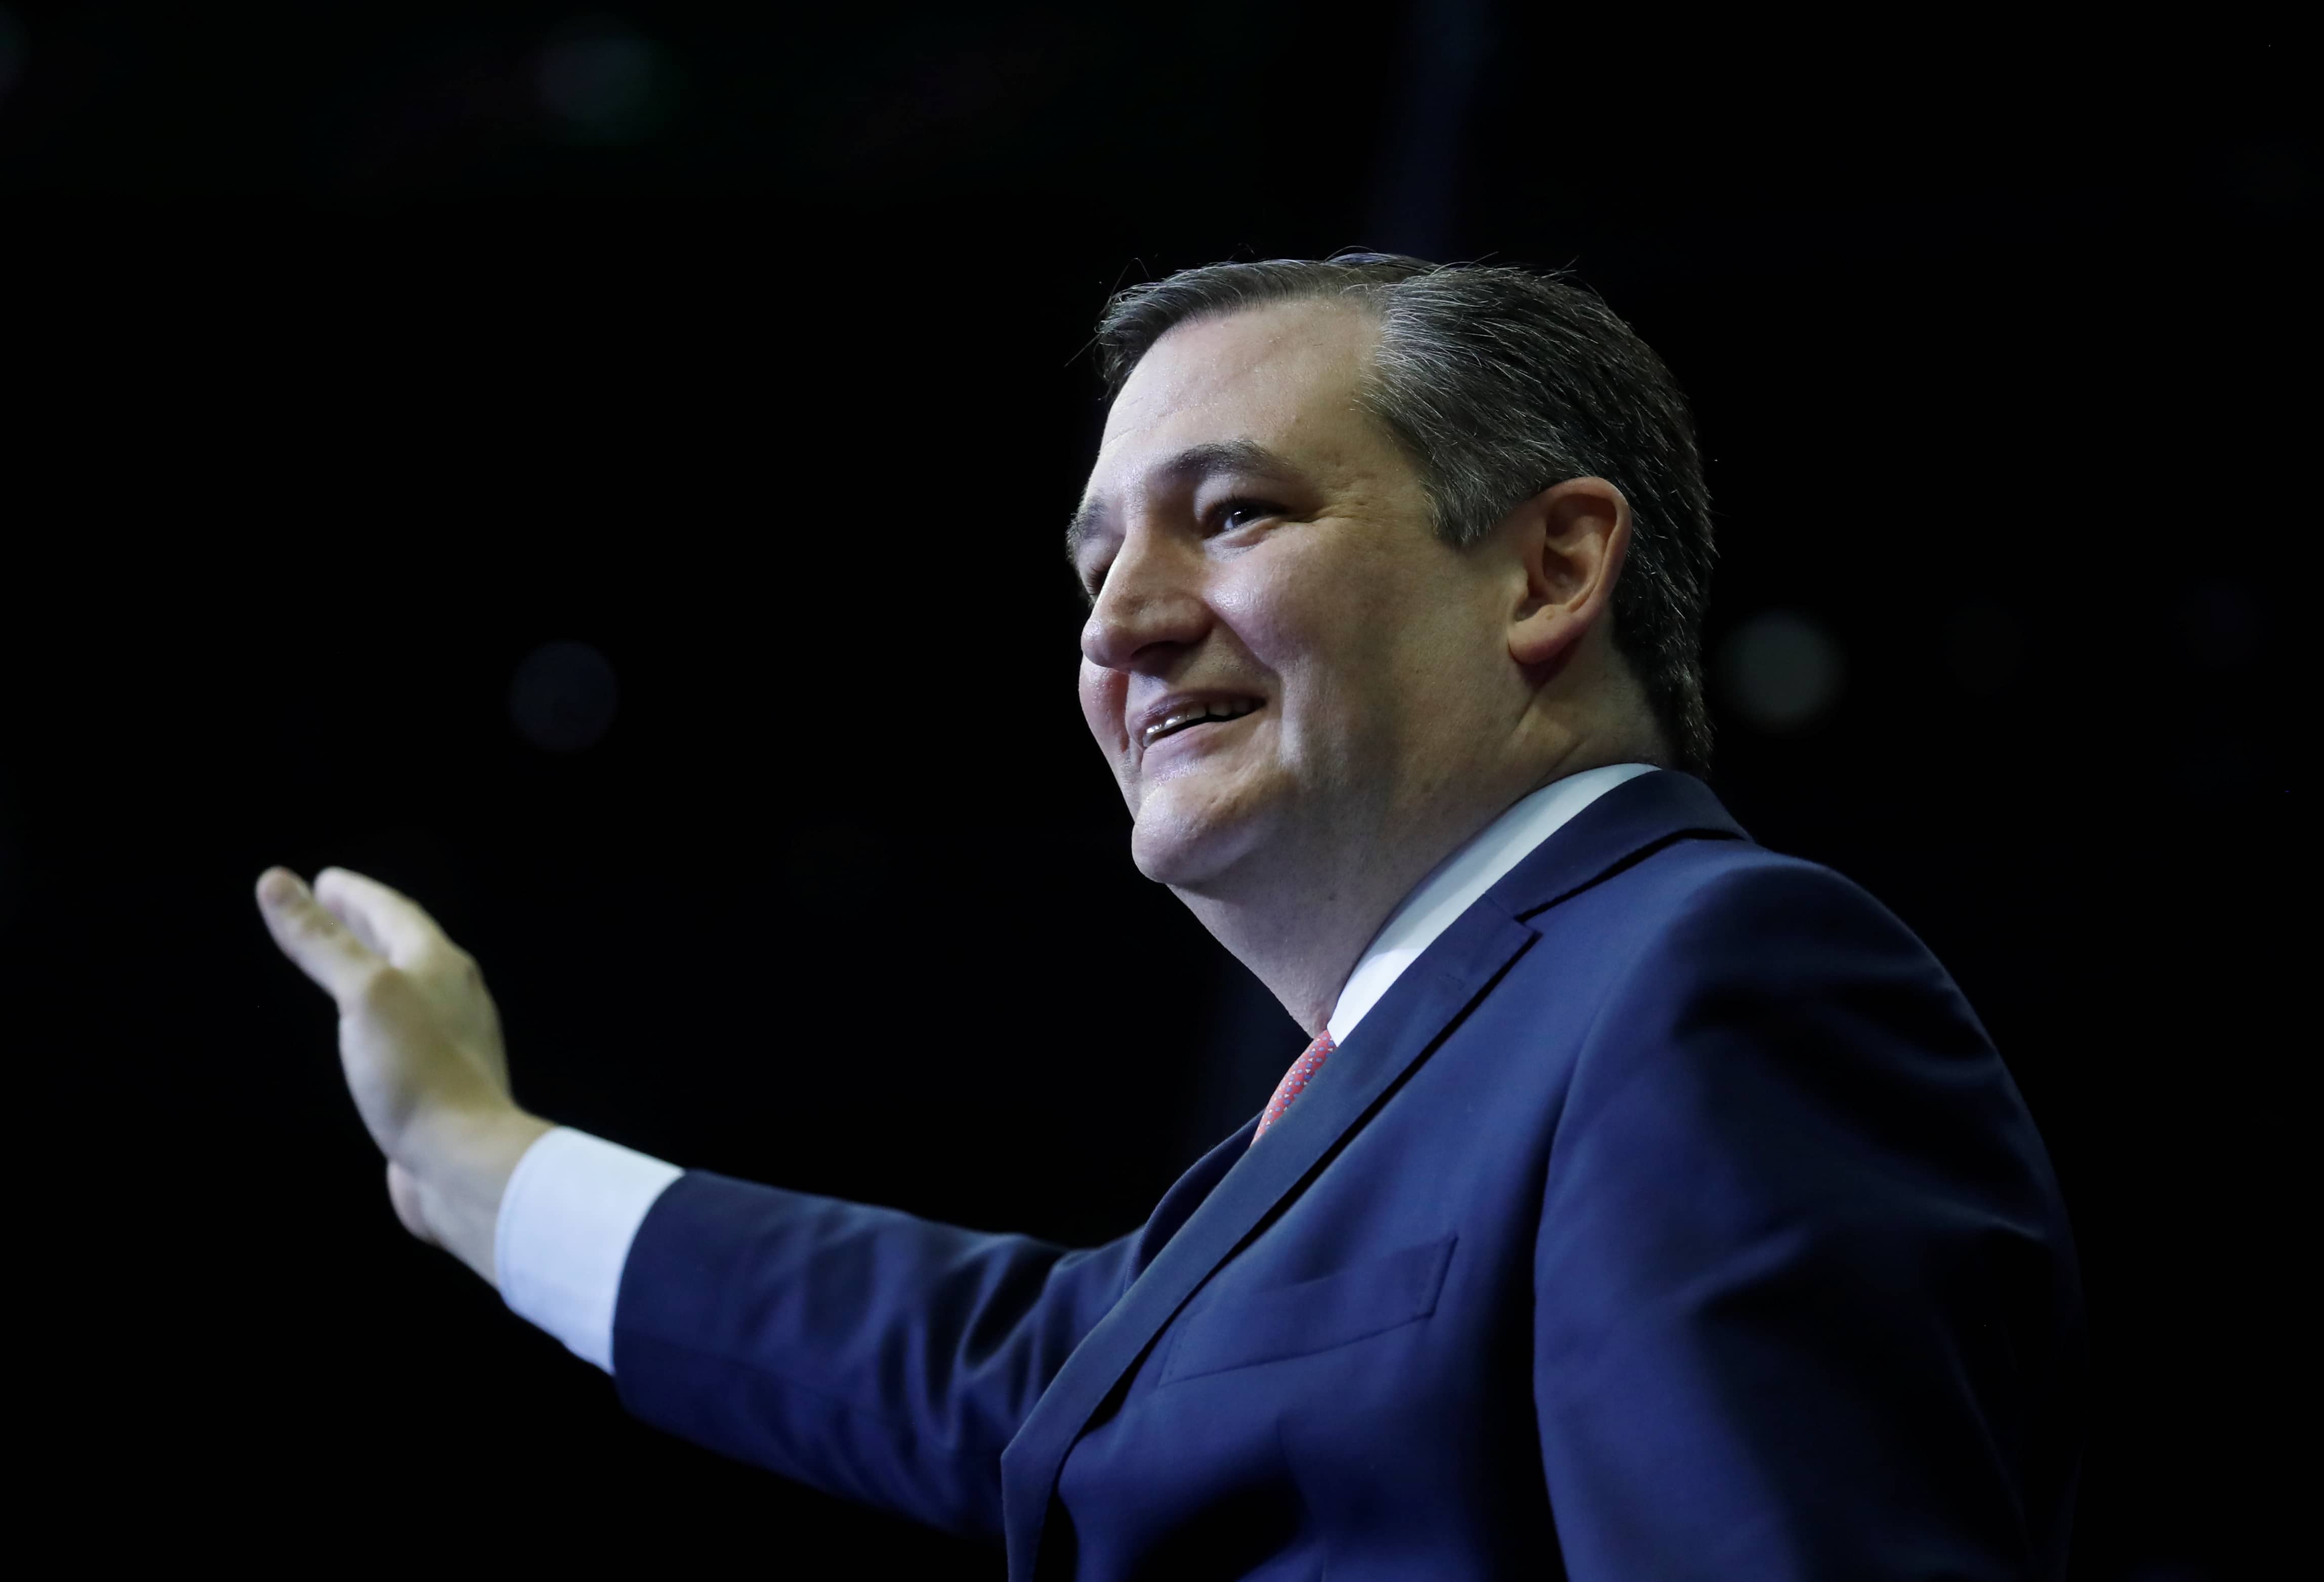 u-s-senator-cruz-r-tx-waves-to-the-crowd-at-a-campaign-rally-in-houston